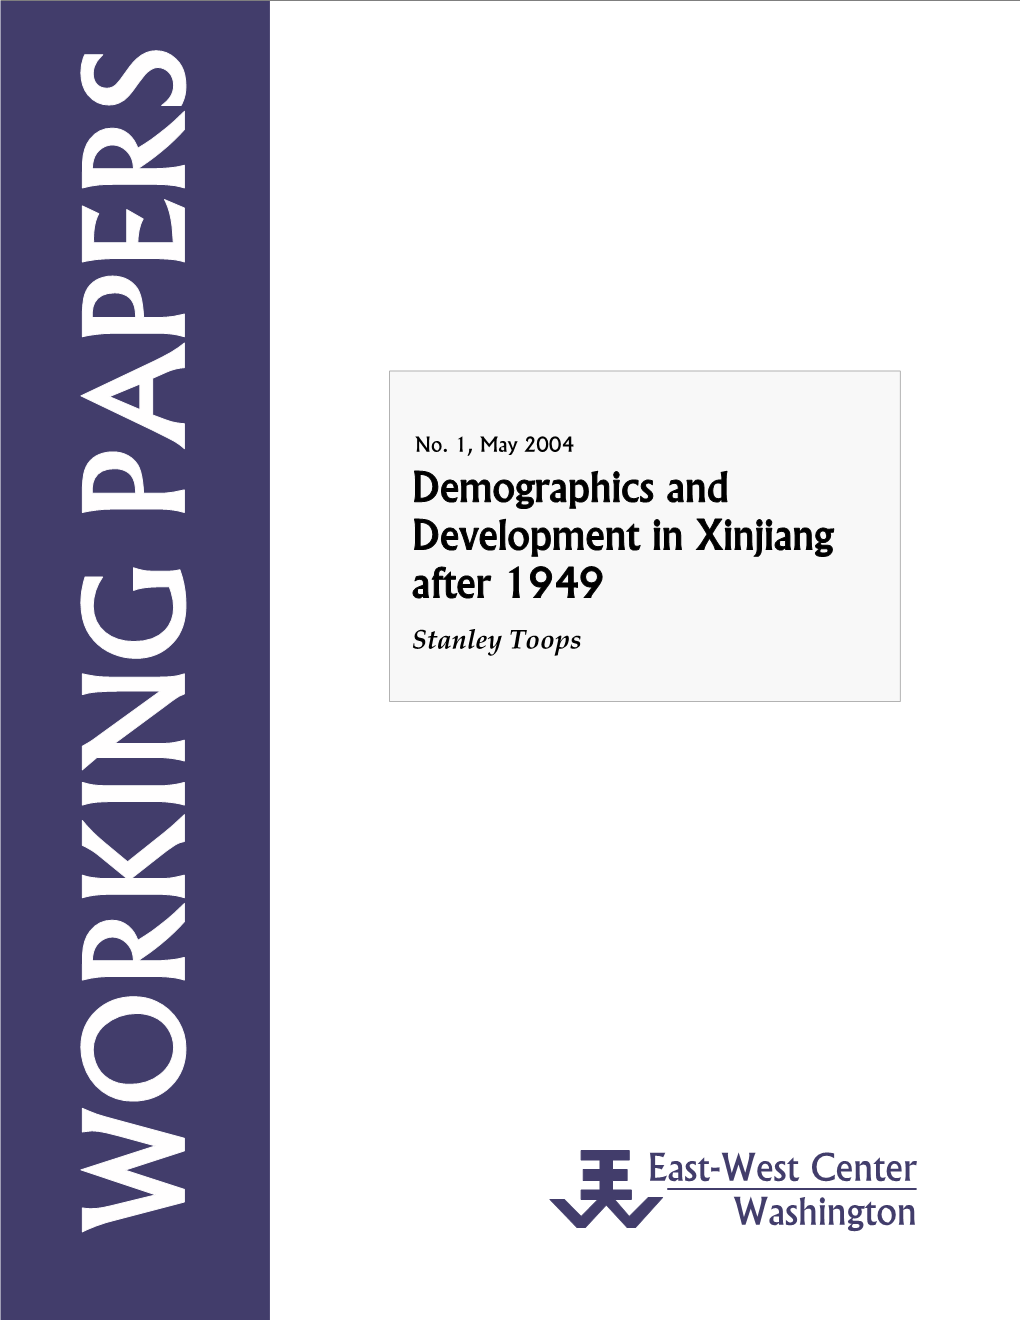 Demographics and Development in Xinjiang After 1949 Stanley Toops